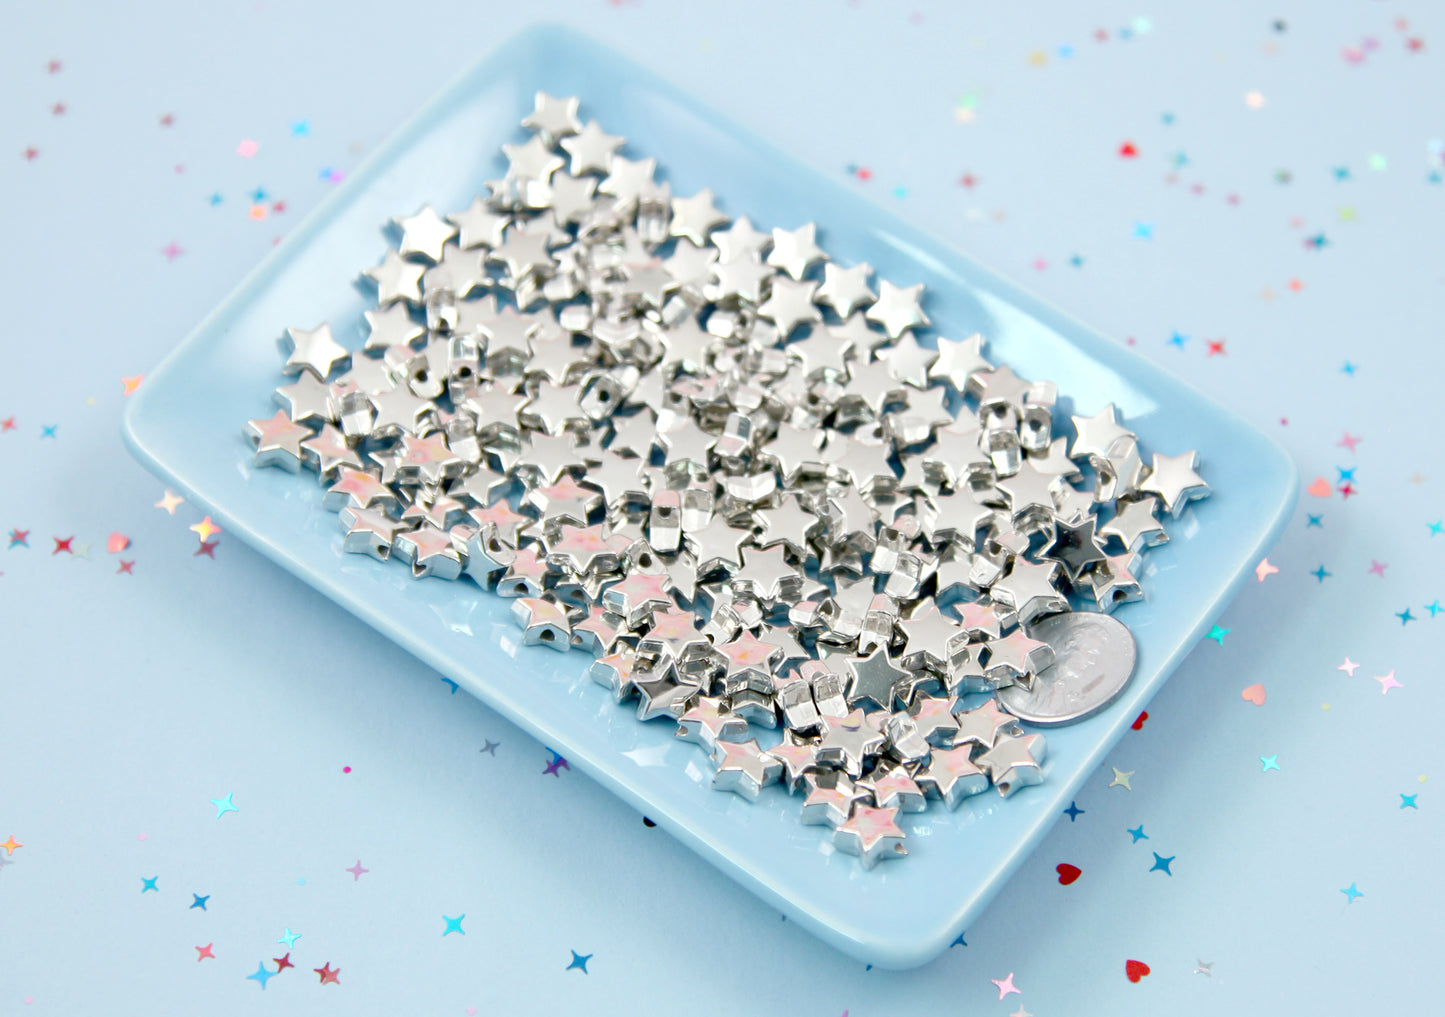 Silver Star Beads - 100 pcs - 10mm Small Star Bead - Electroplated Silver - Easily make any kind of jewelry